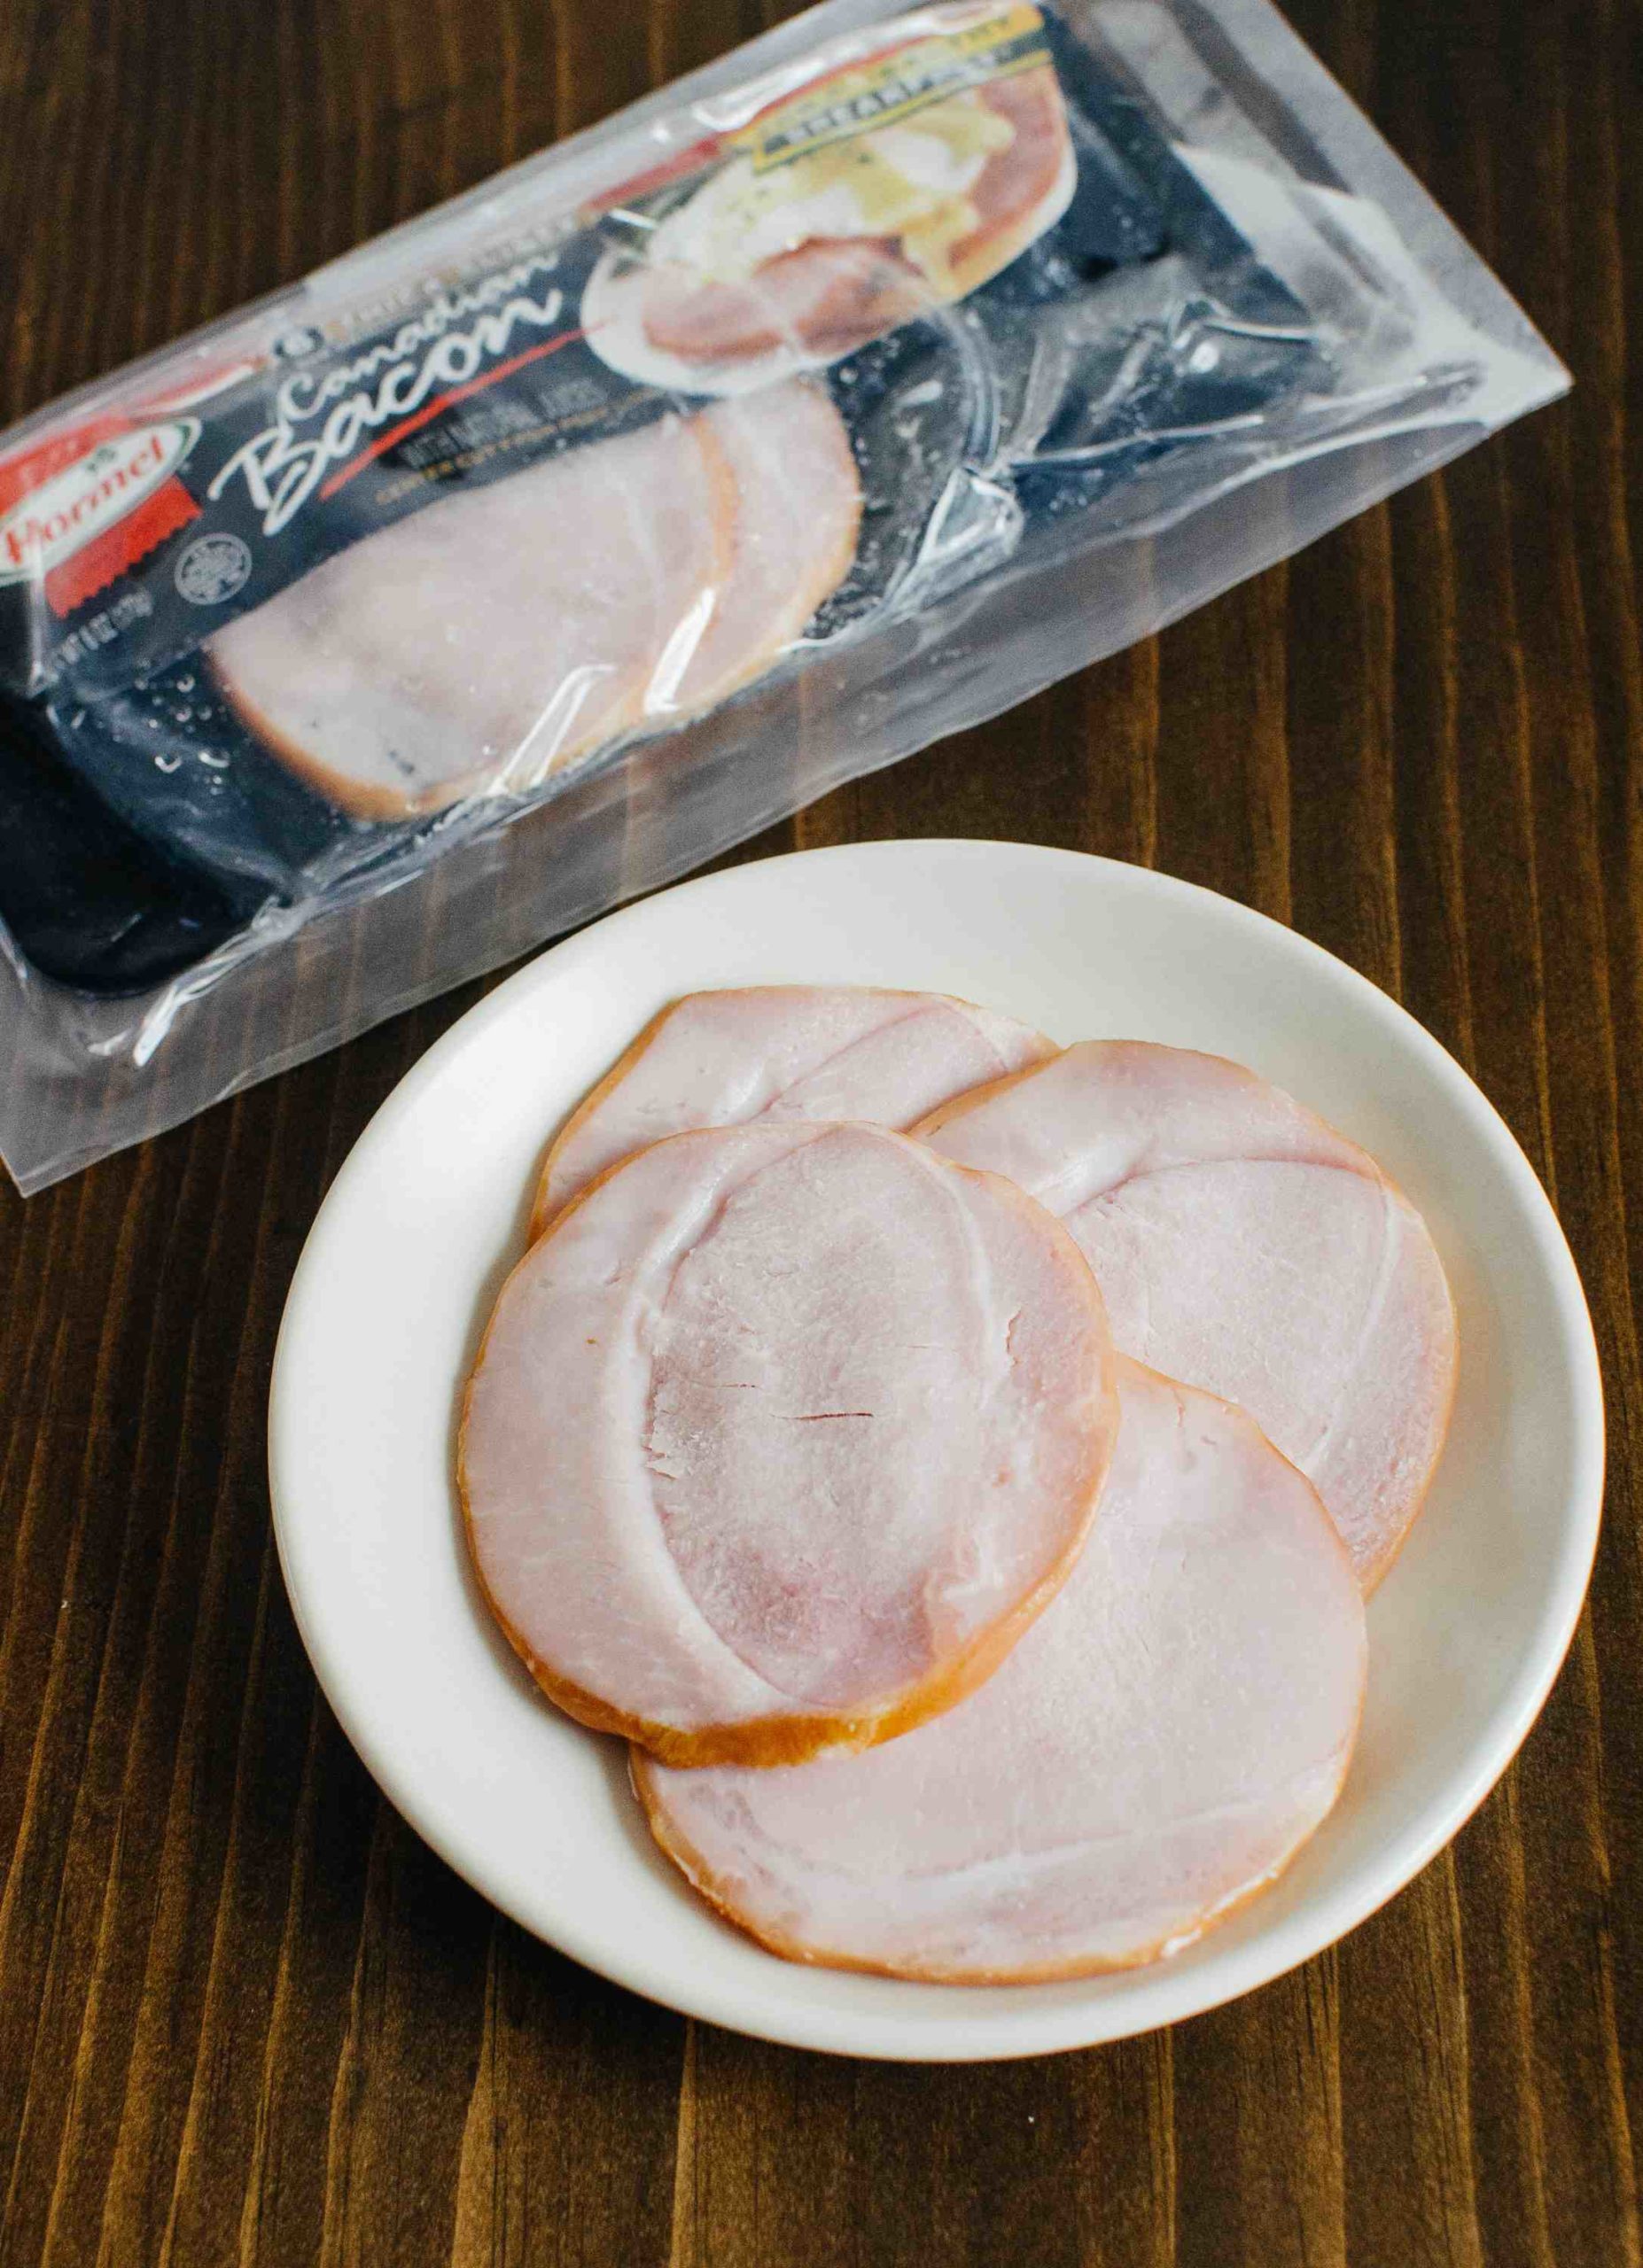 Which is healthier turkey bacon or Canadian bacon?